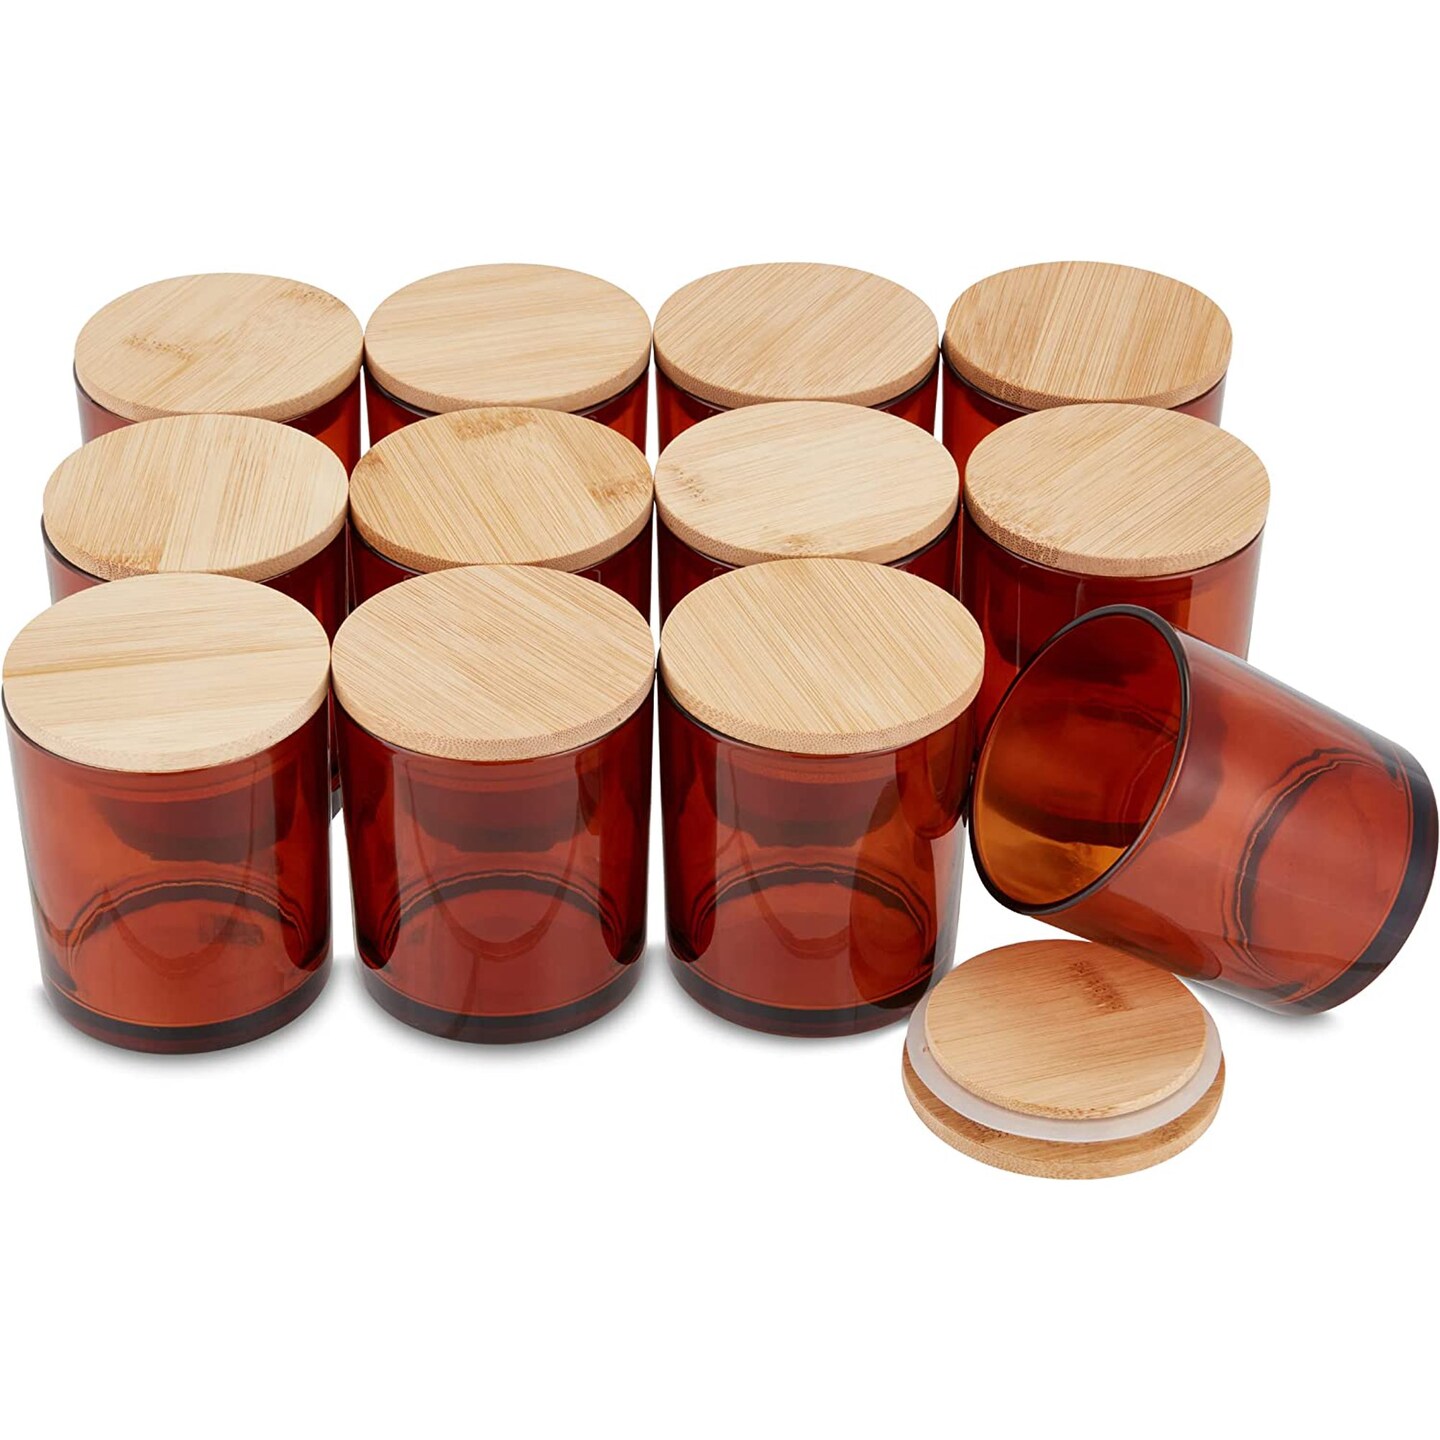 Pavelle 12 Pack Glass Candle Jars, 10 oz Empty Candle Jars with Bamboo Lids  for Candle Making & Candle Storage